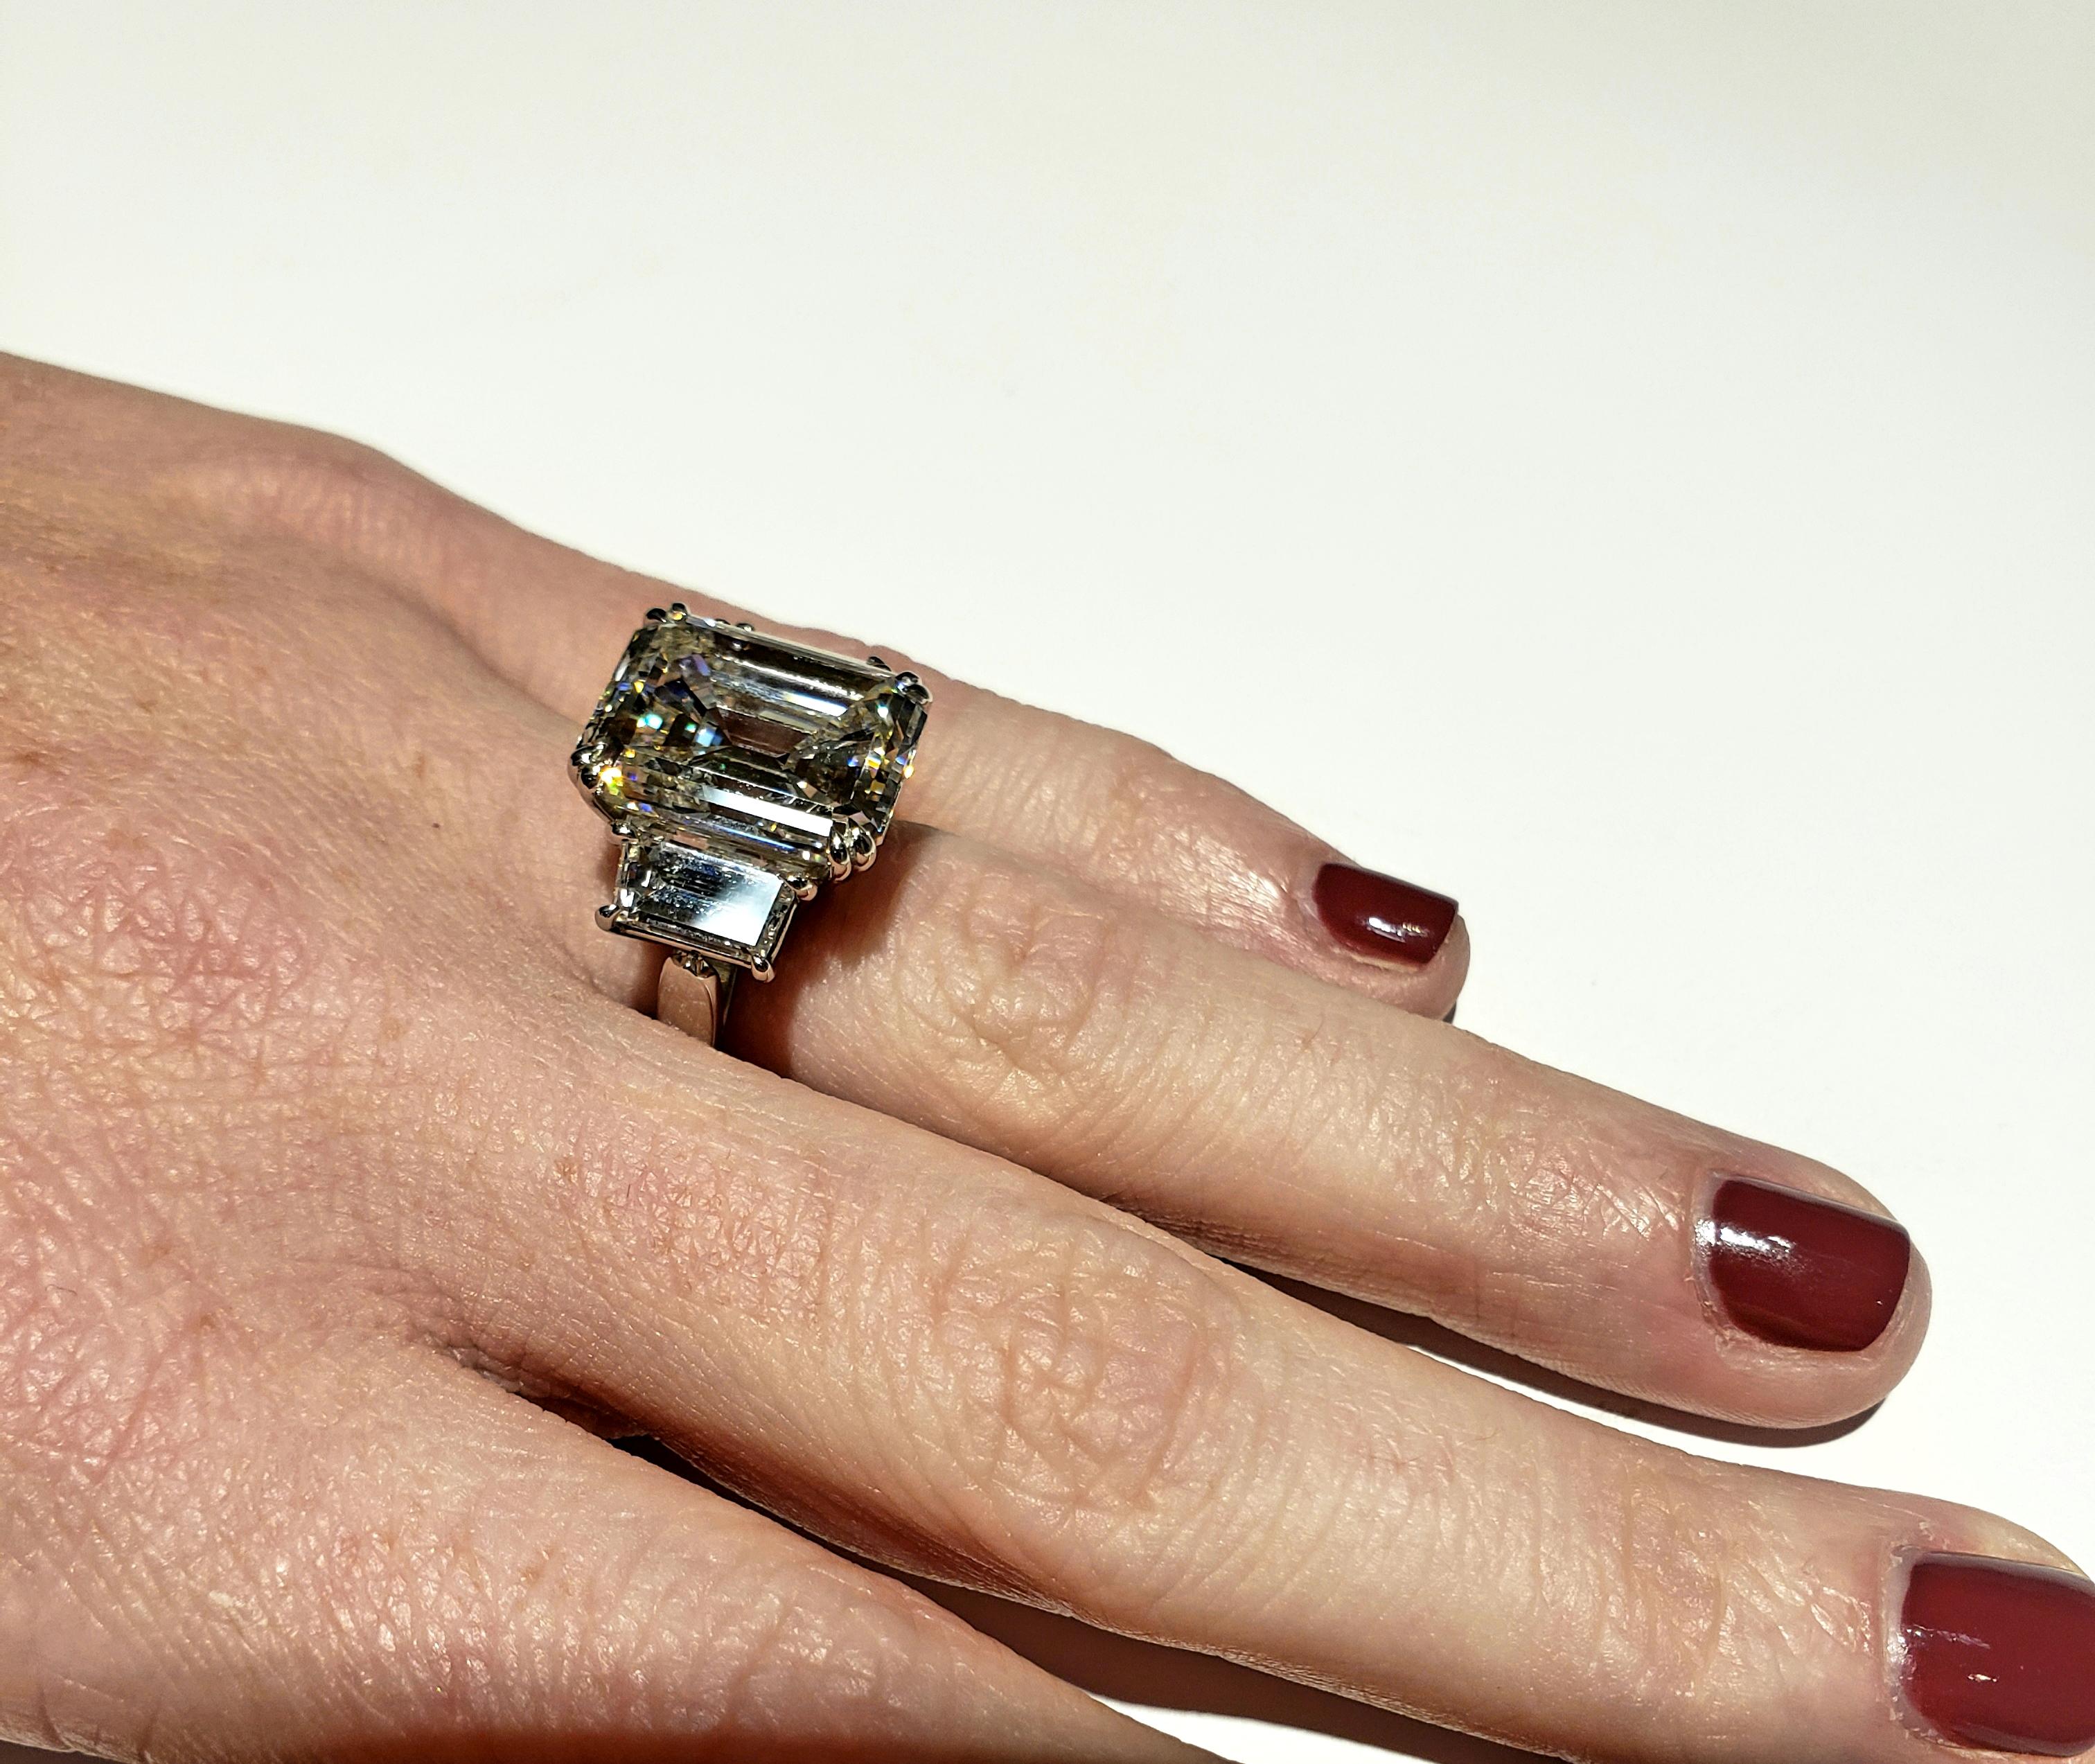 **LOWER PRICE**  Originally $390,000. NOW $325,000.!!!
A beautiful GIA certified 10.29 carat emerald cut diamond I color / VS1 clarity, set in an entirely handmade platinum mounting.
Ring has emerald cut stones on either side. 1.04 carats each.